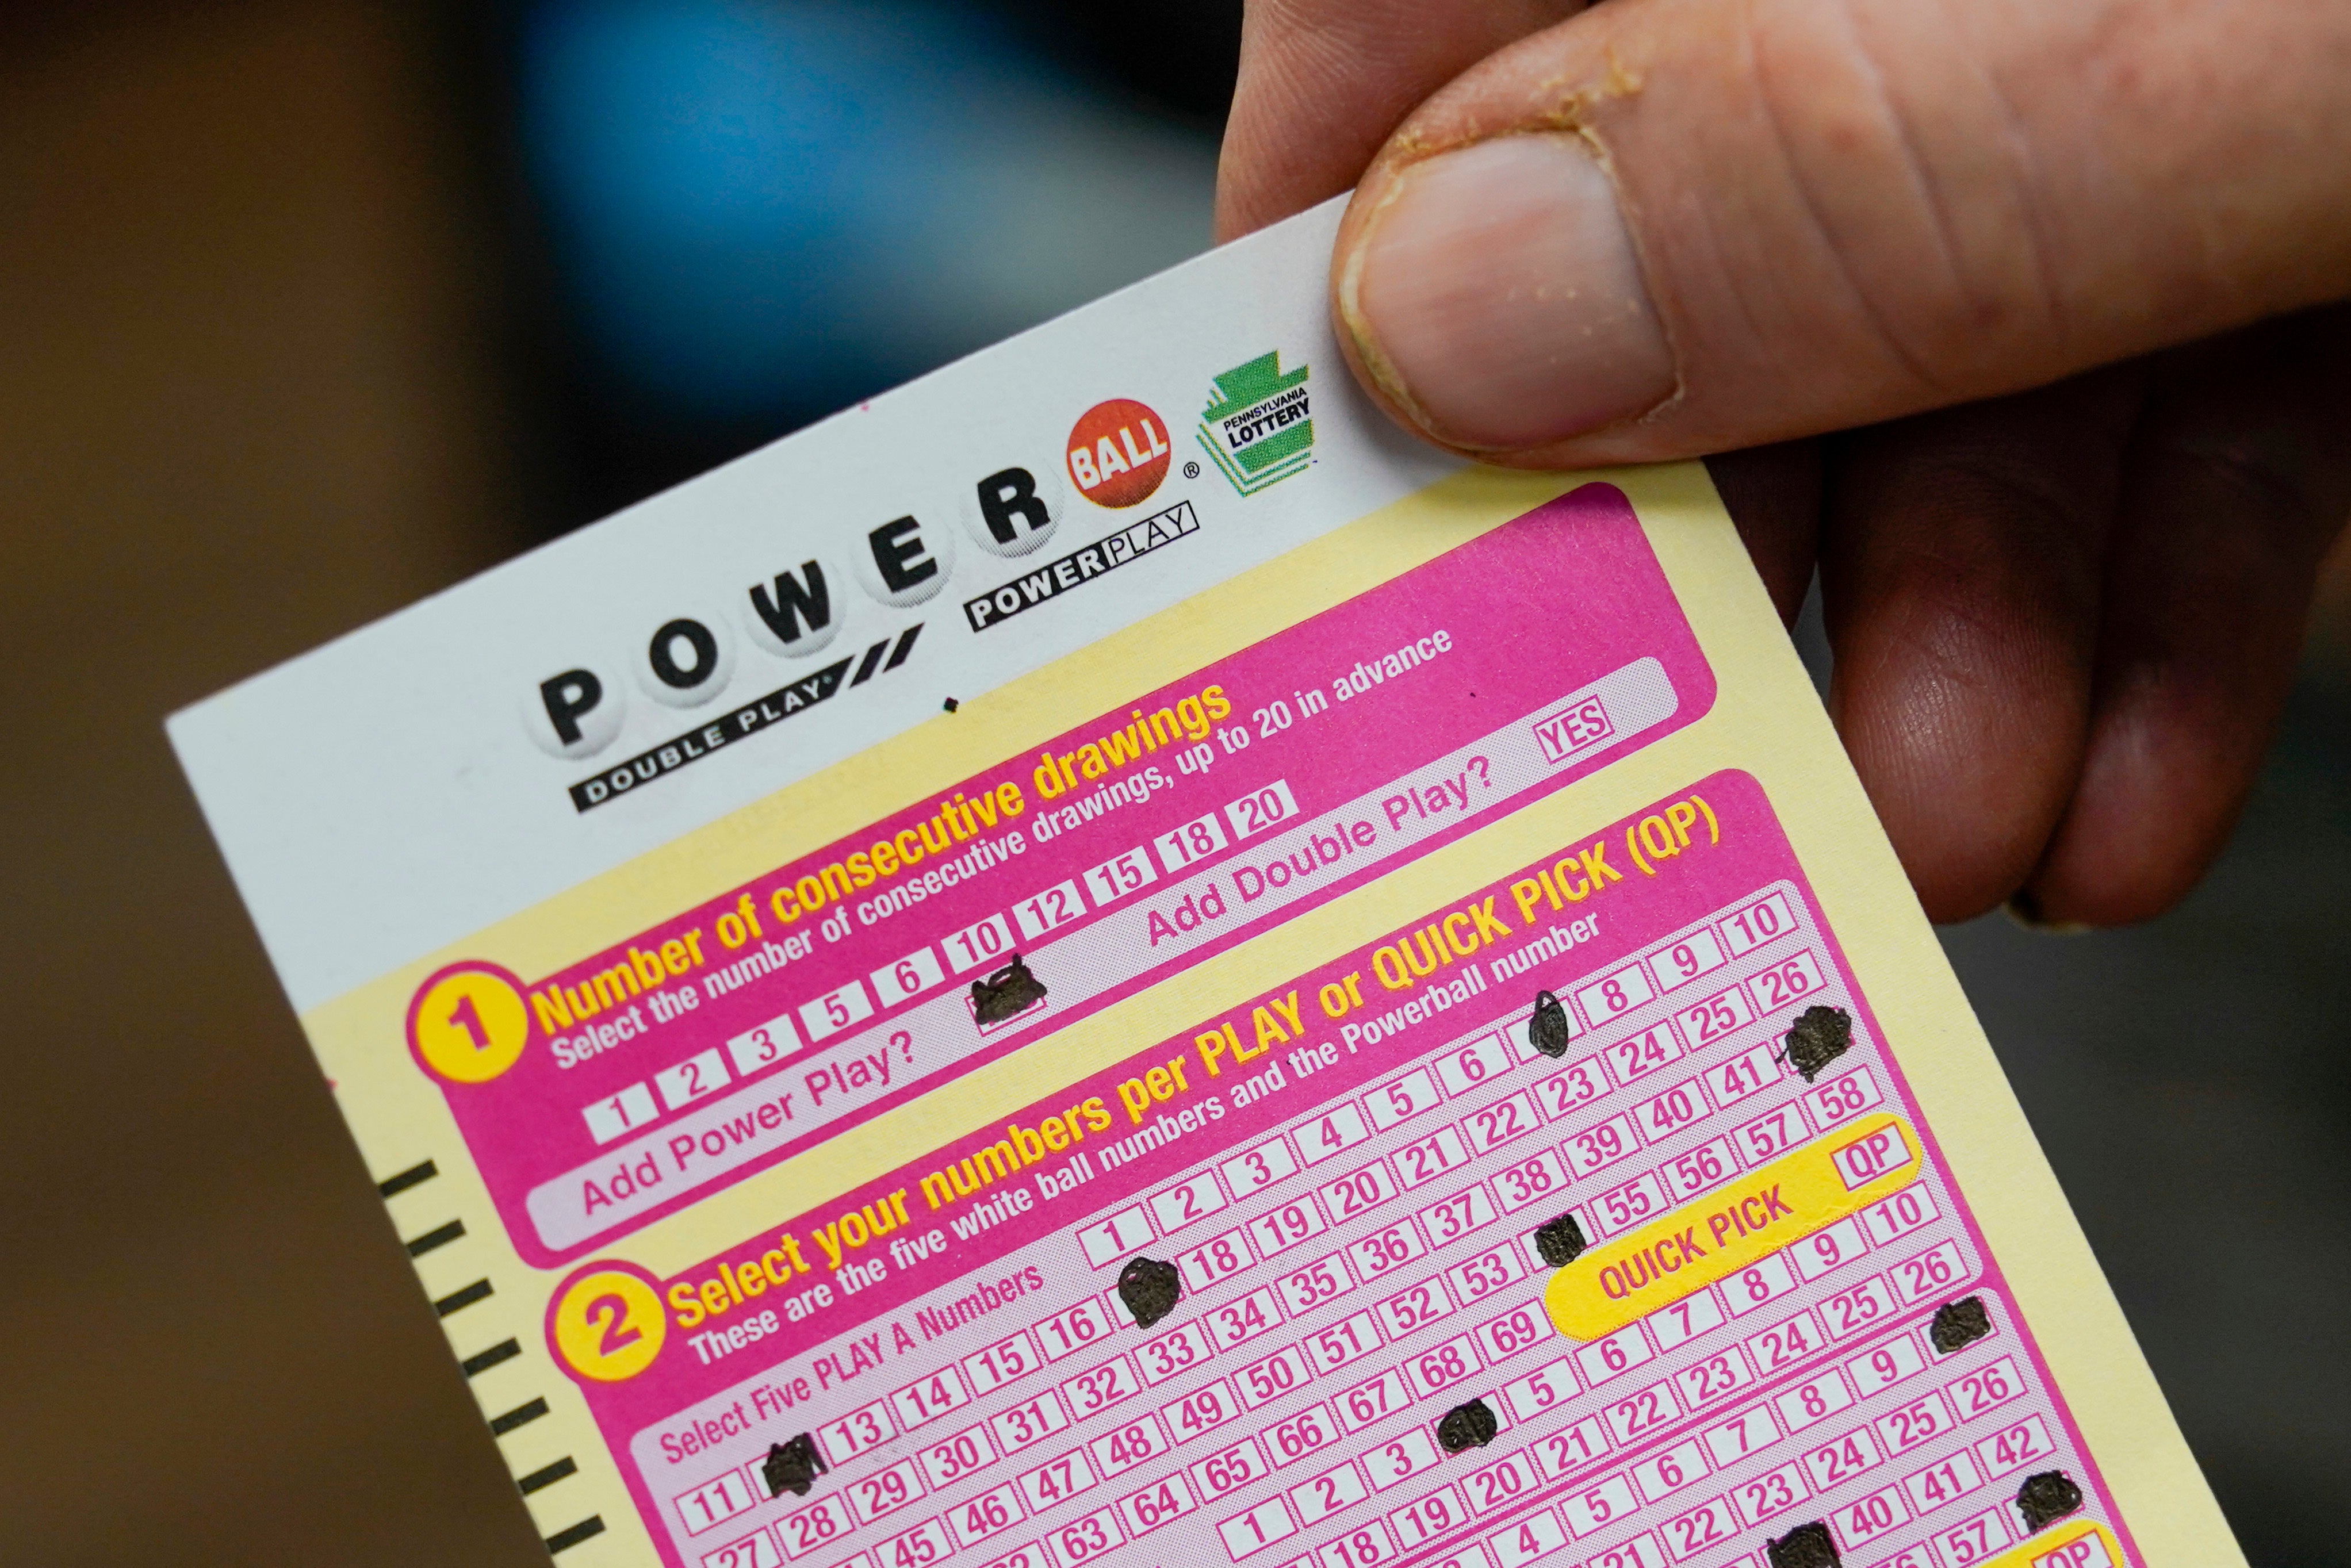 The Powerball jackpot has increased by 200 million since the last draw